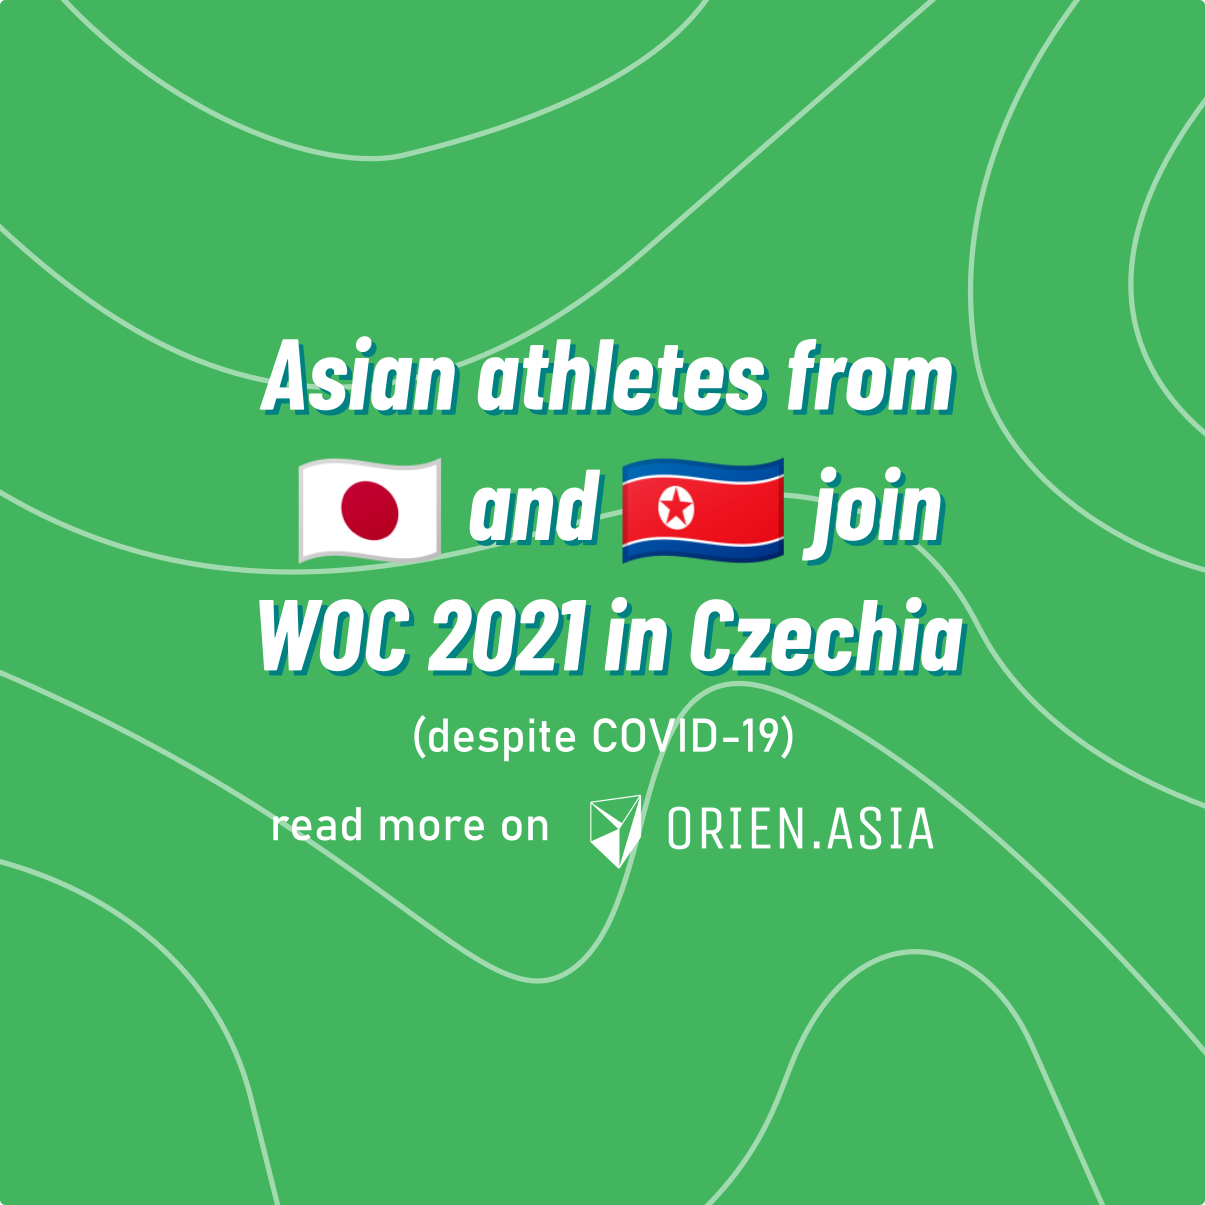 Asian athletes join WOC 2021 in Czechia despite COVID-19